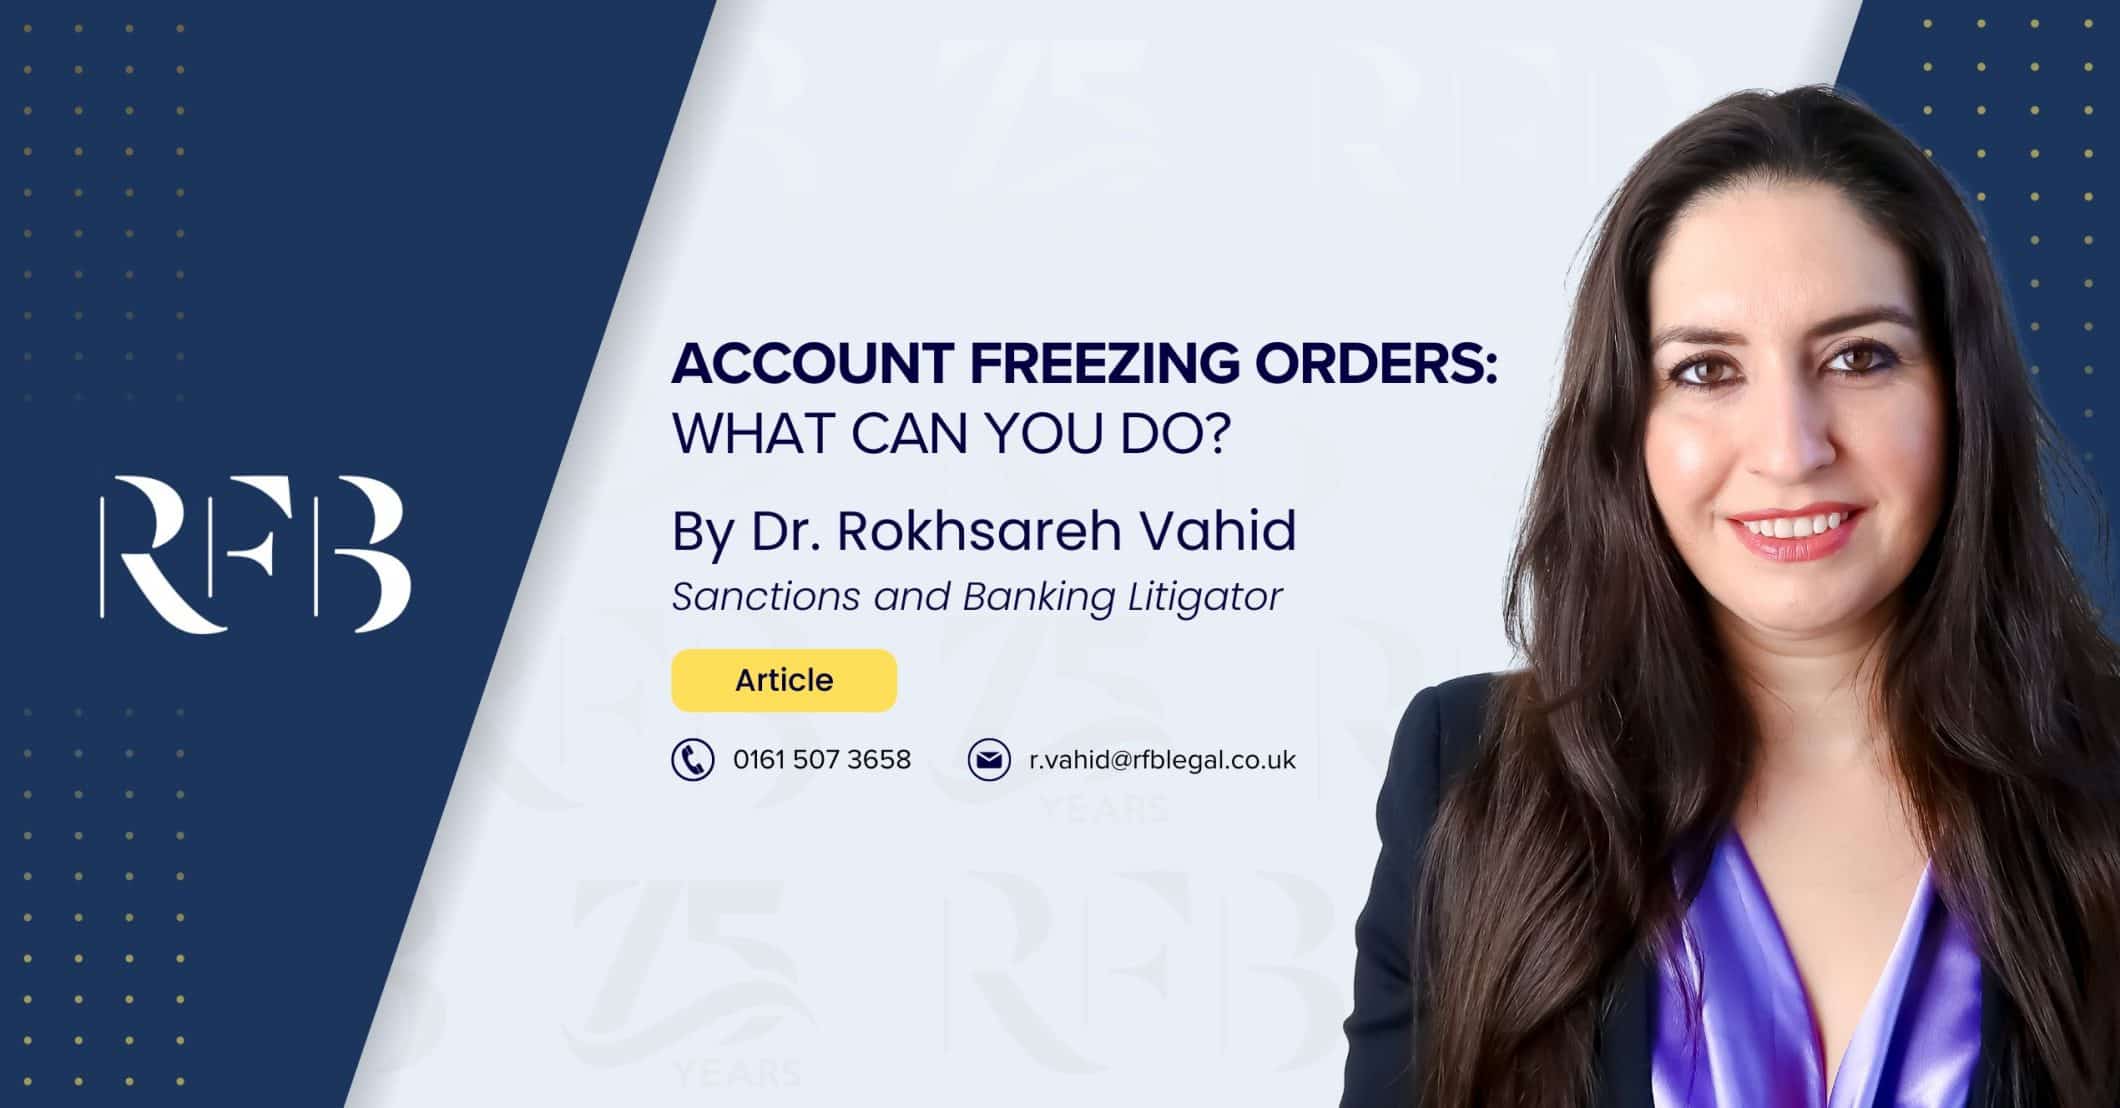 Cover Image for the Article "Account Freezing Orders: What Can You Do?" By Dr. Rokhsareh Vahid